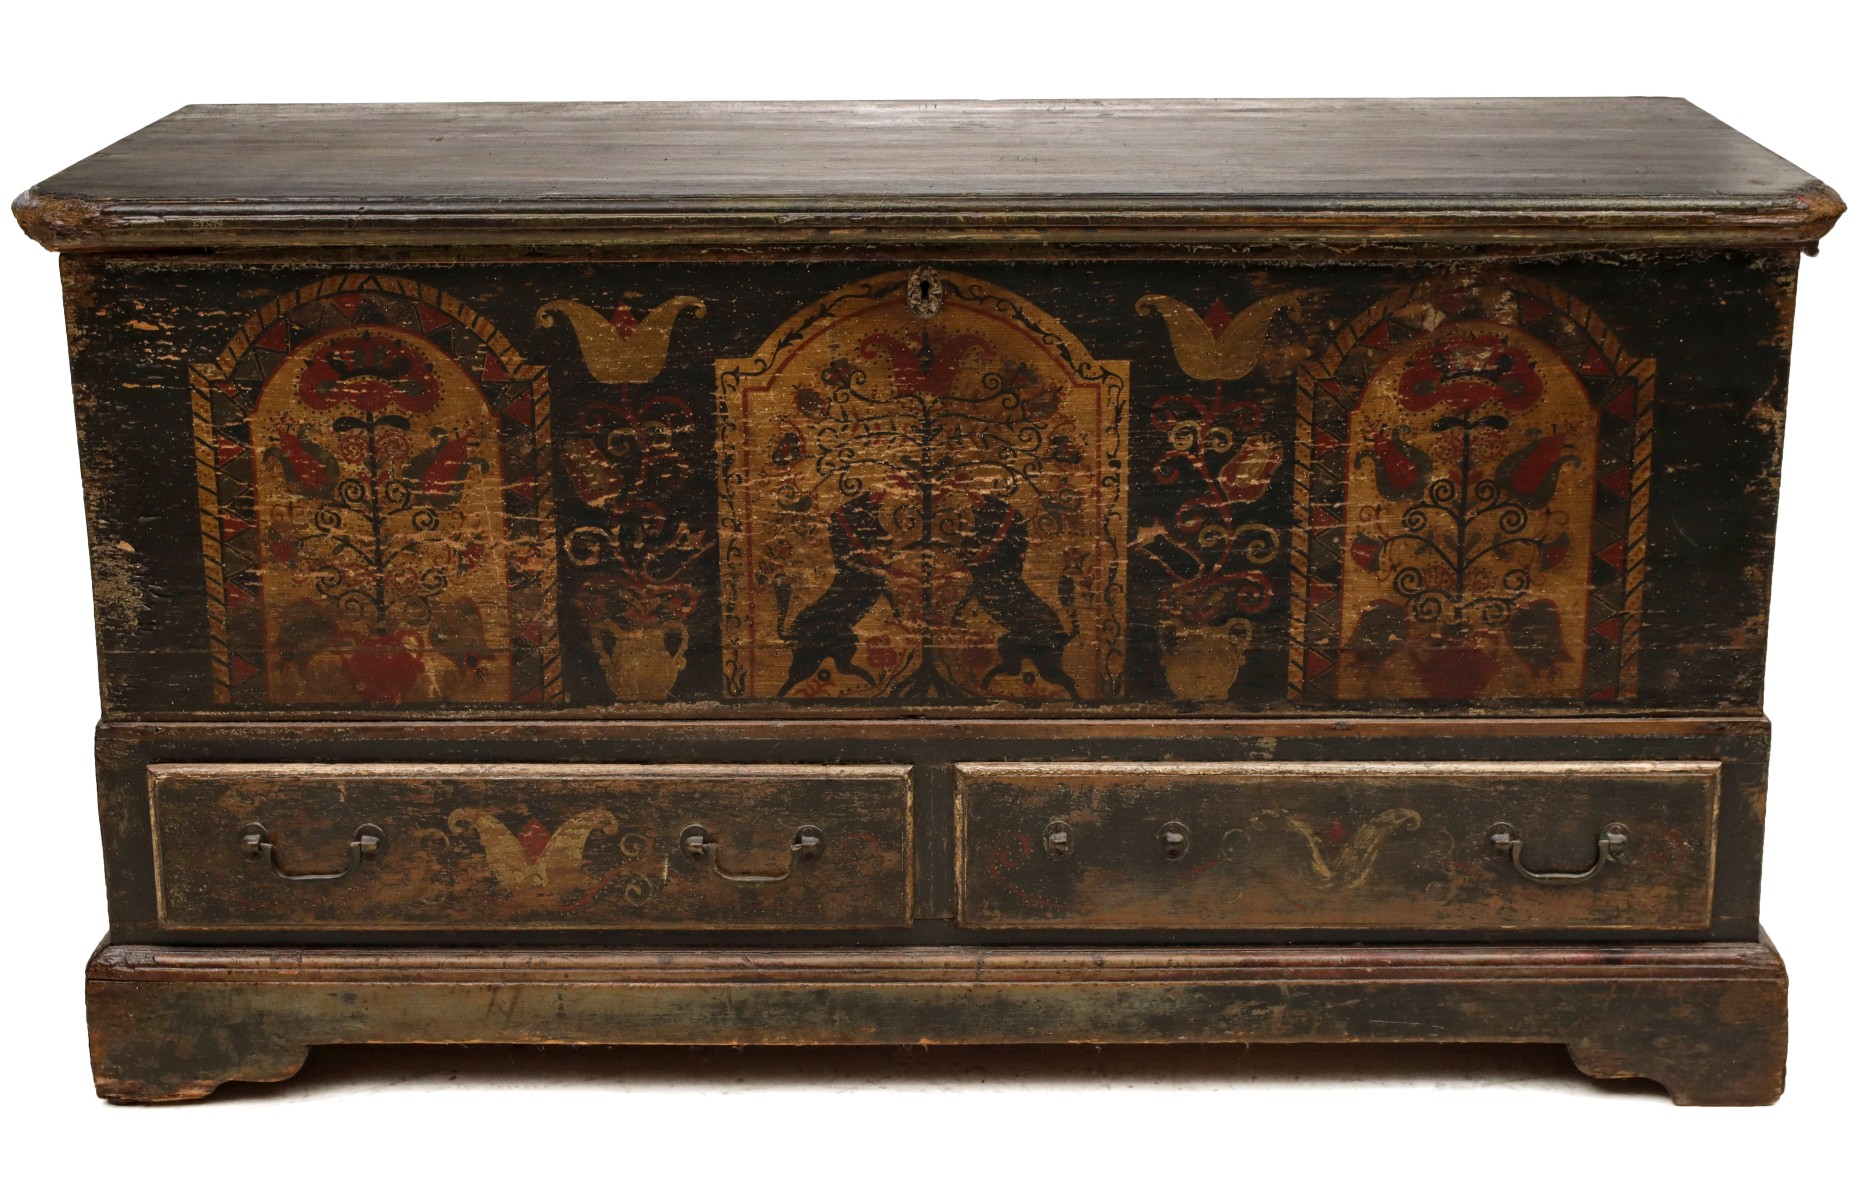 A MID 20TH CENTURY REPRODUCTION BLANKET CHEST